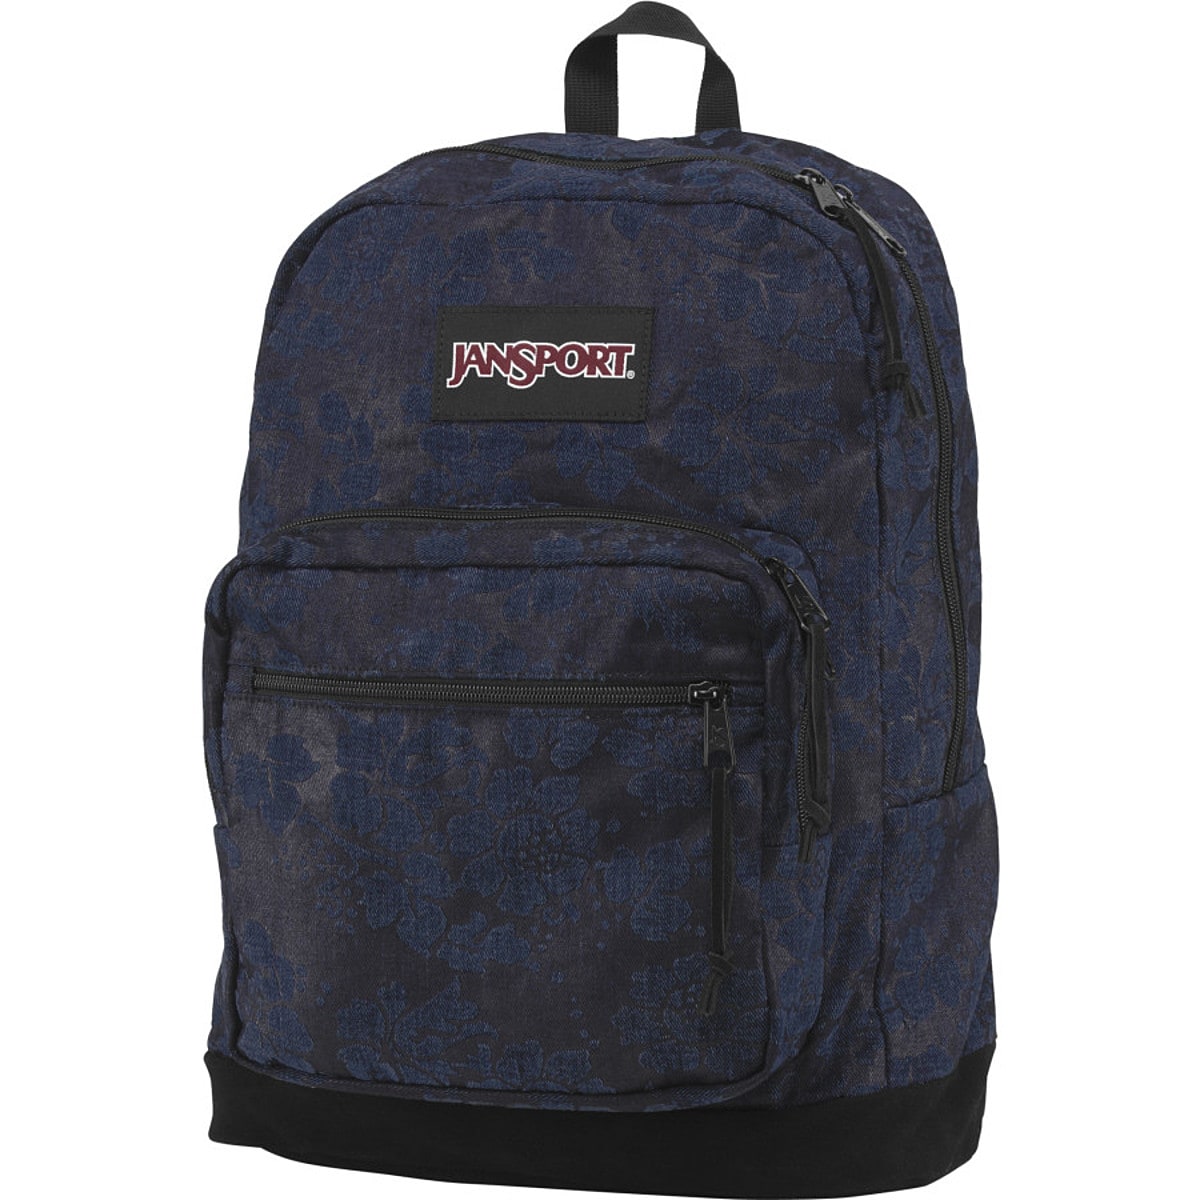  Right Pack Digital Edition Laptop Backpack - 1900cu in Fun 